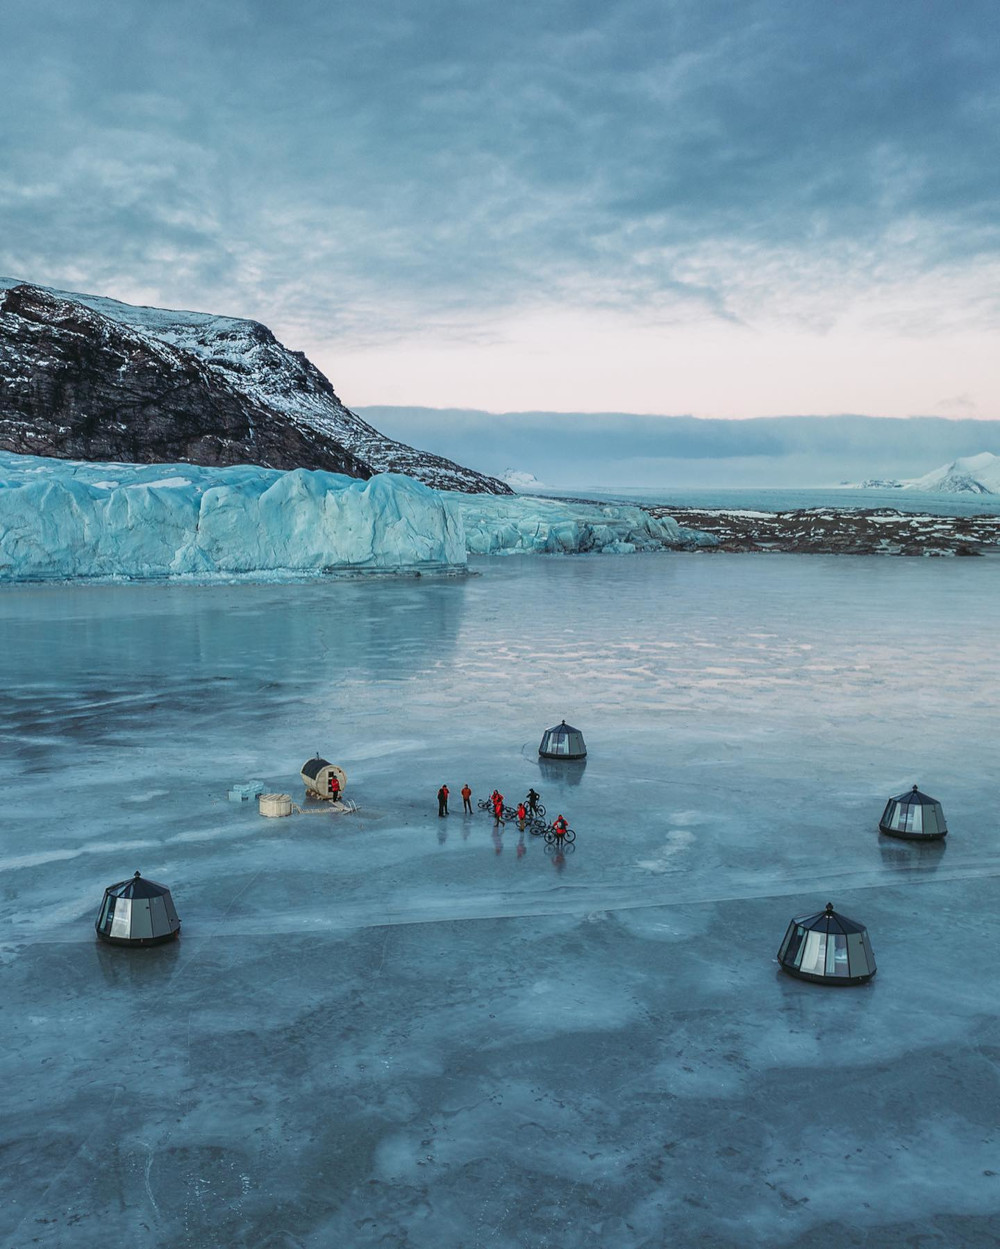 9 persons inside a circle of igloo huts + sauna hut on a frozen glacial lagoon, view from above with drone picture shot. Glacier edge and mountain in background.